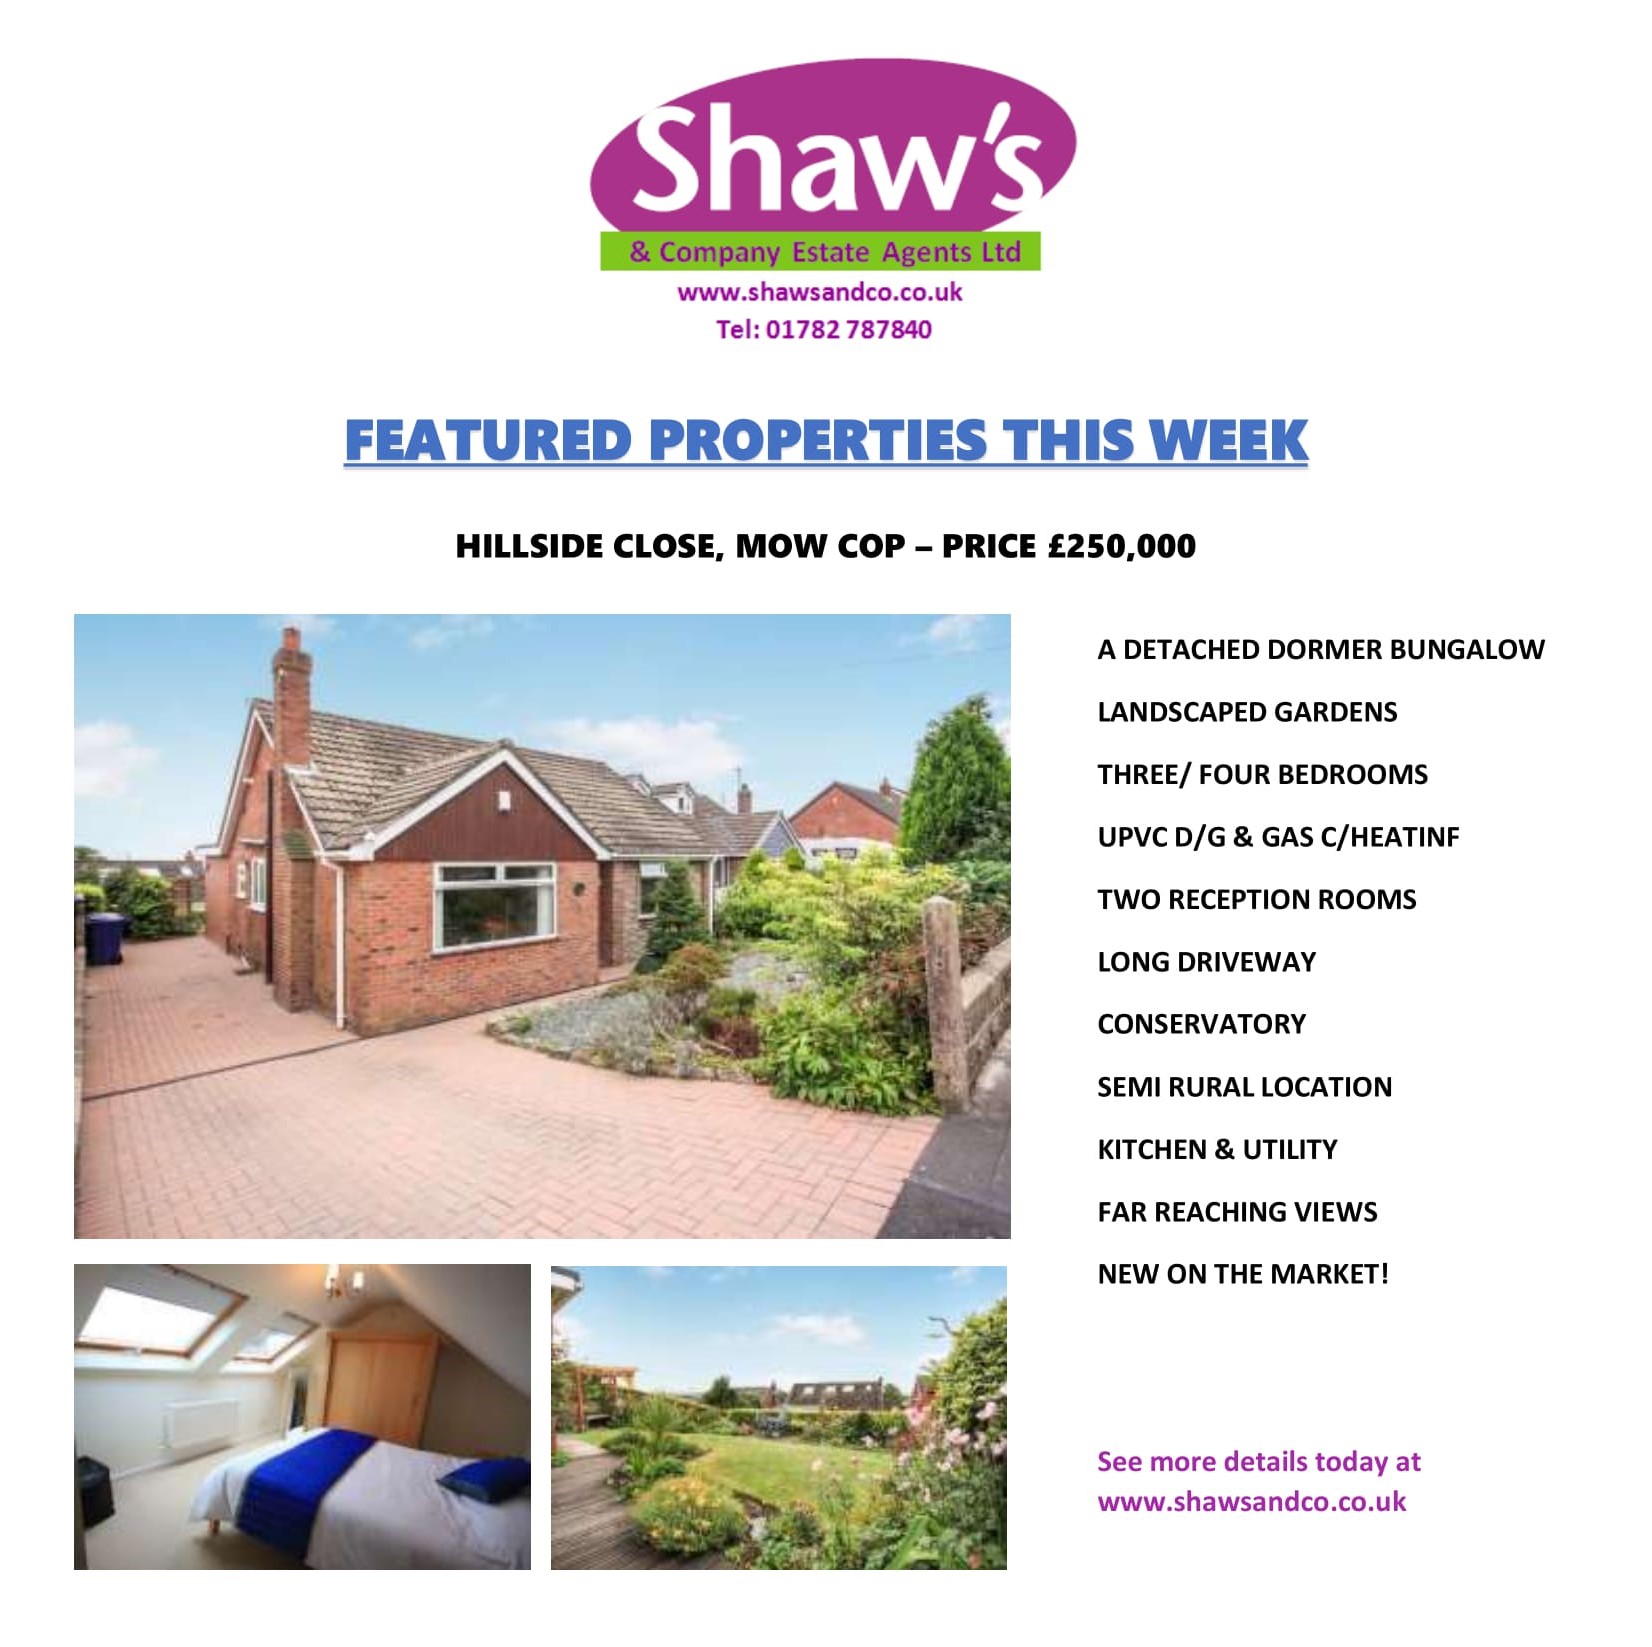 NEW & FEATURED PROPERTIES THIS WEEK!